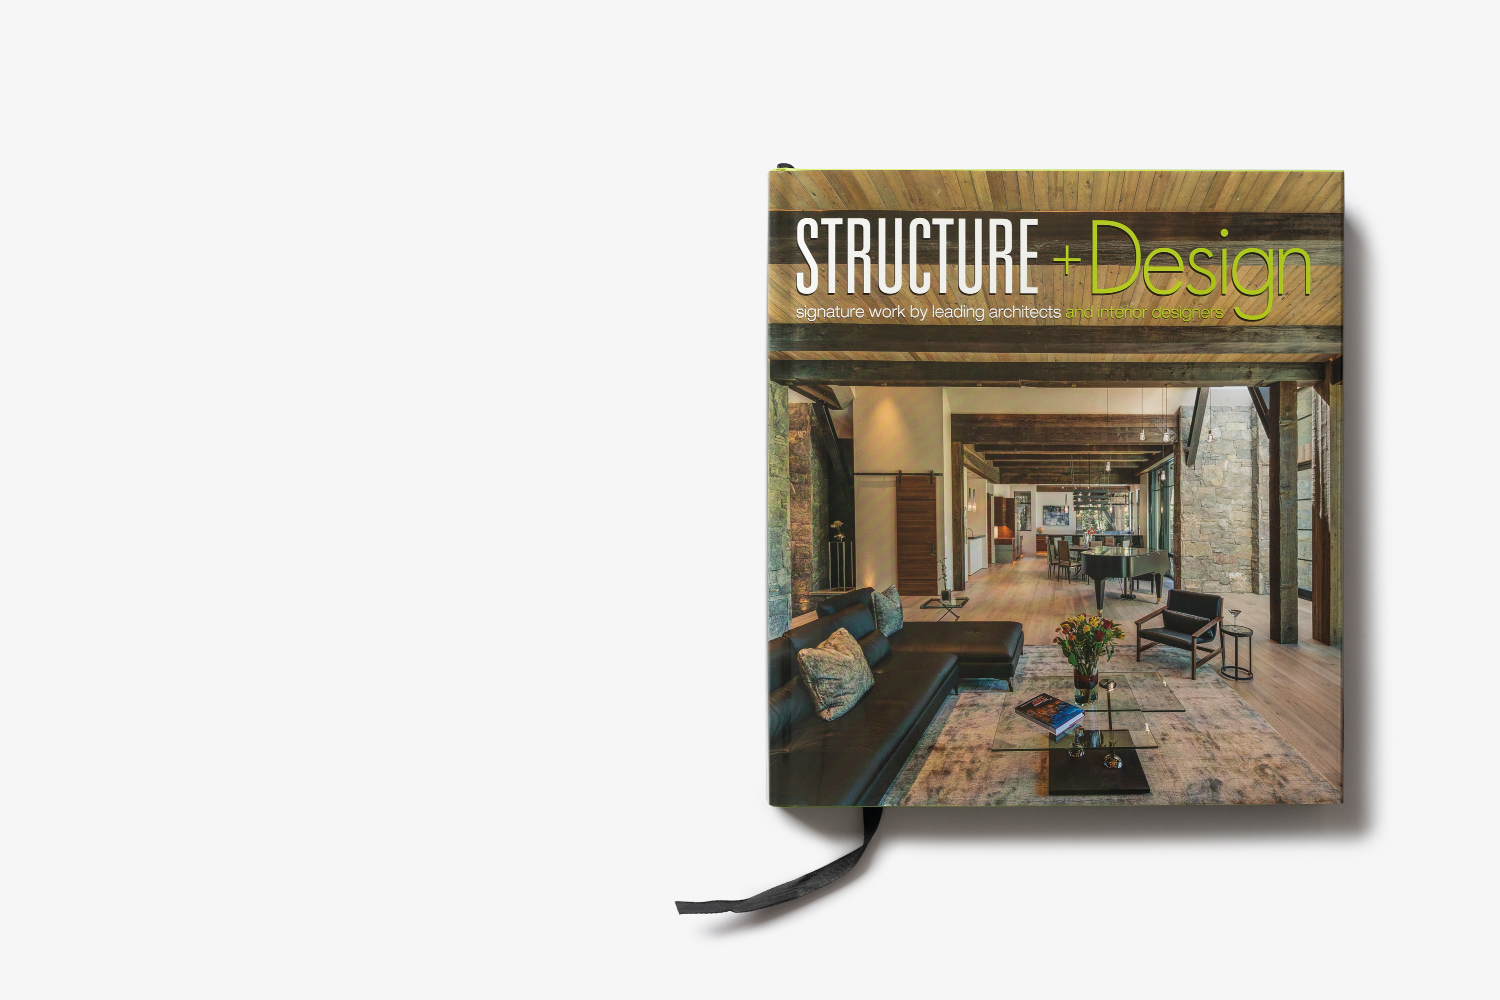 Birdseye Featured in “Structure and Design” Book